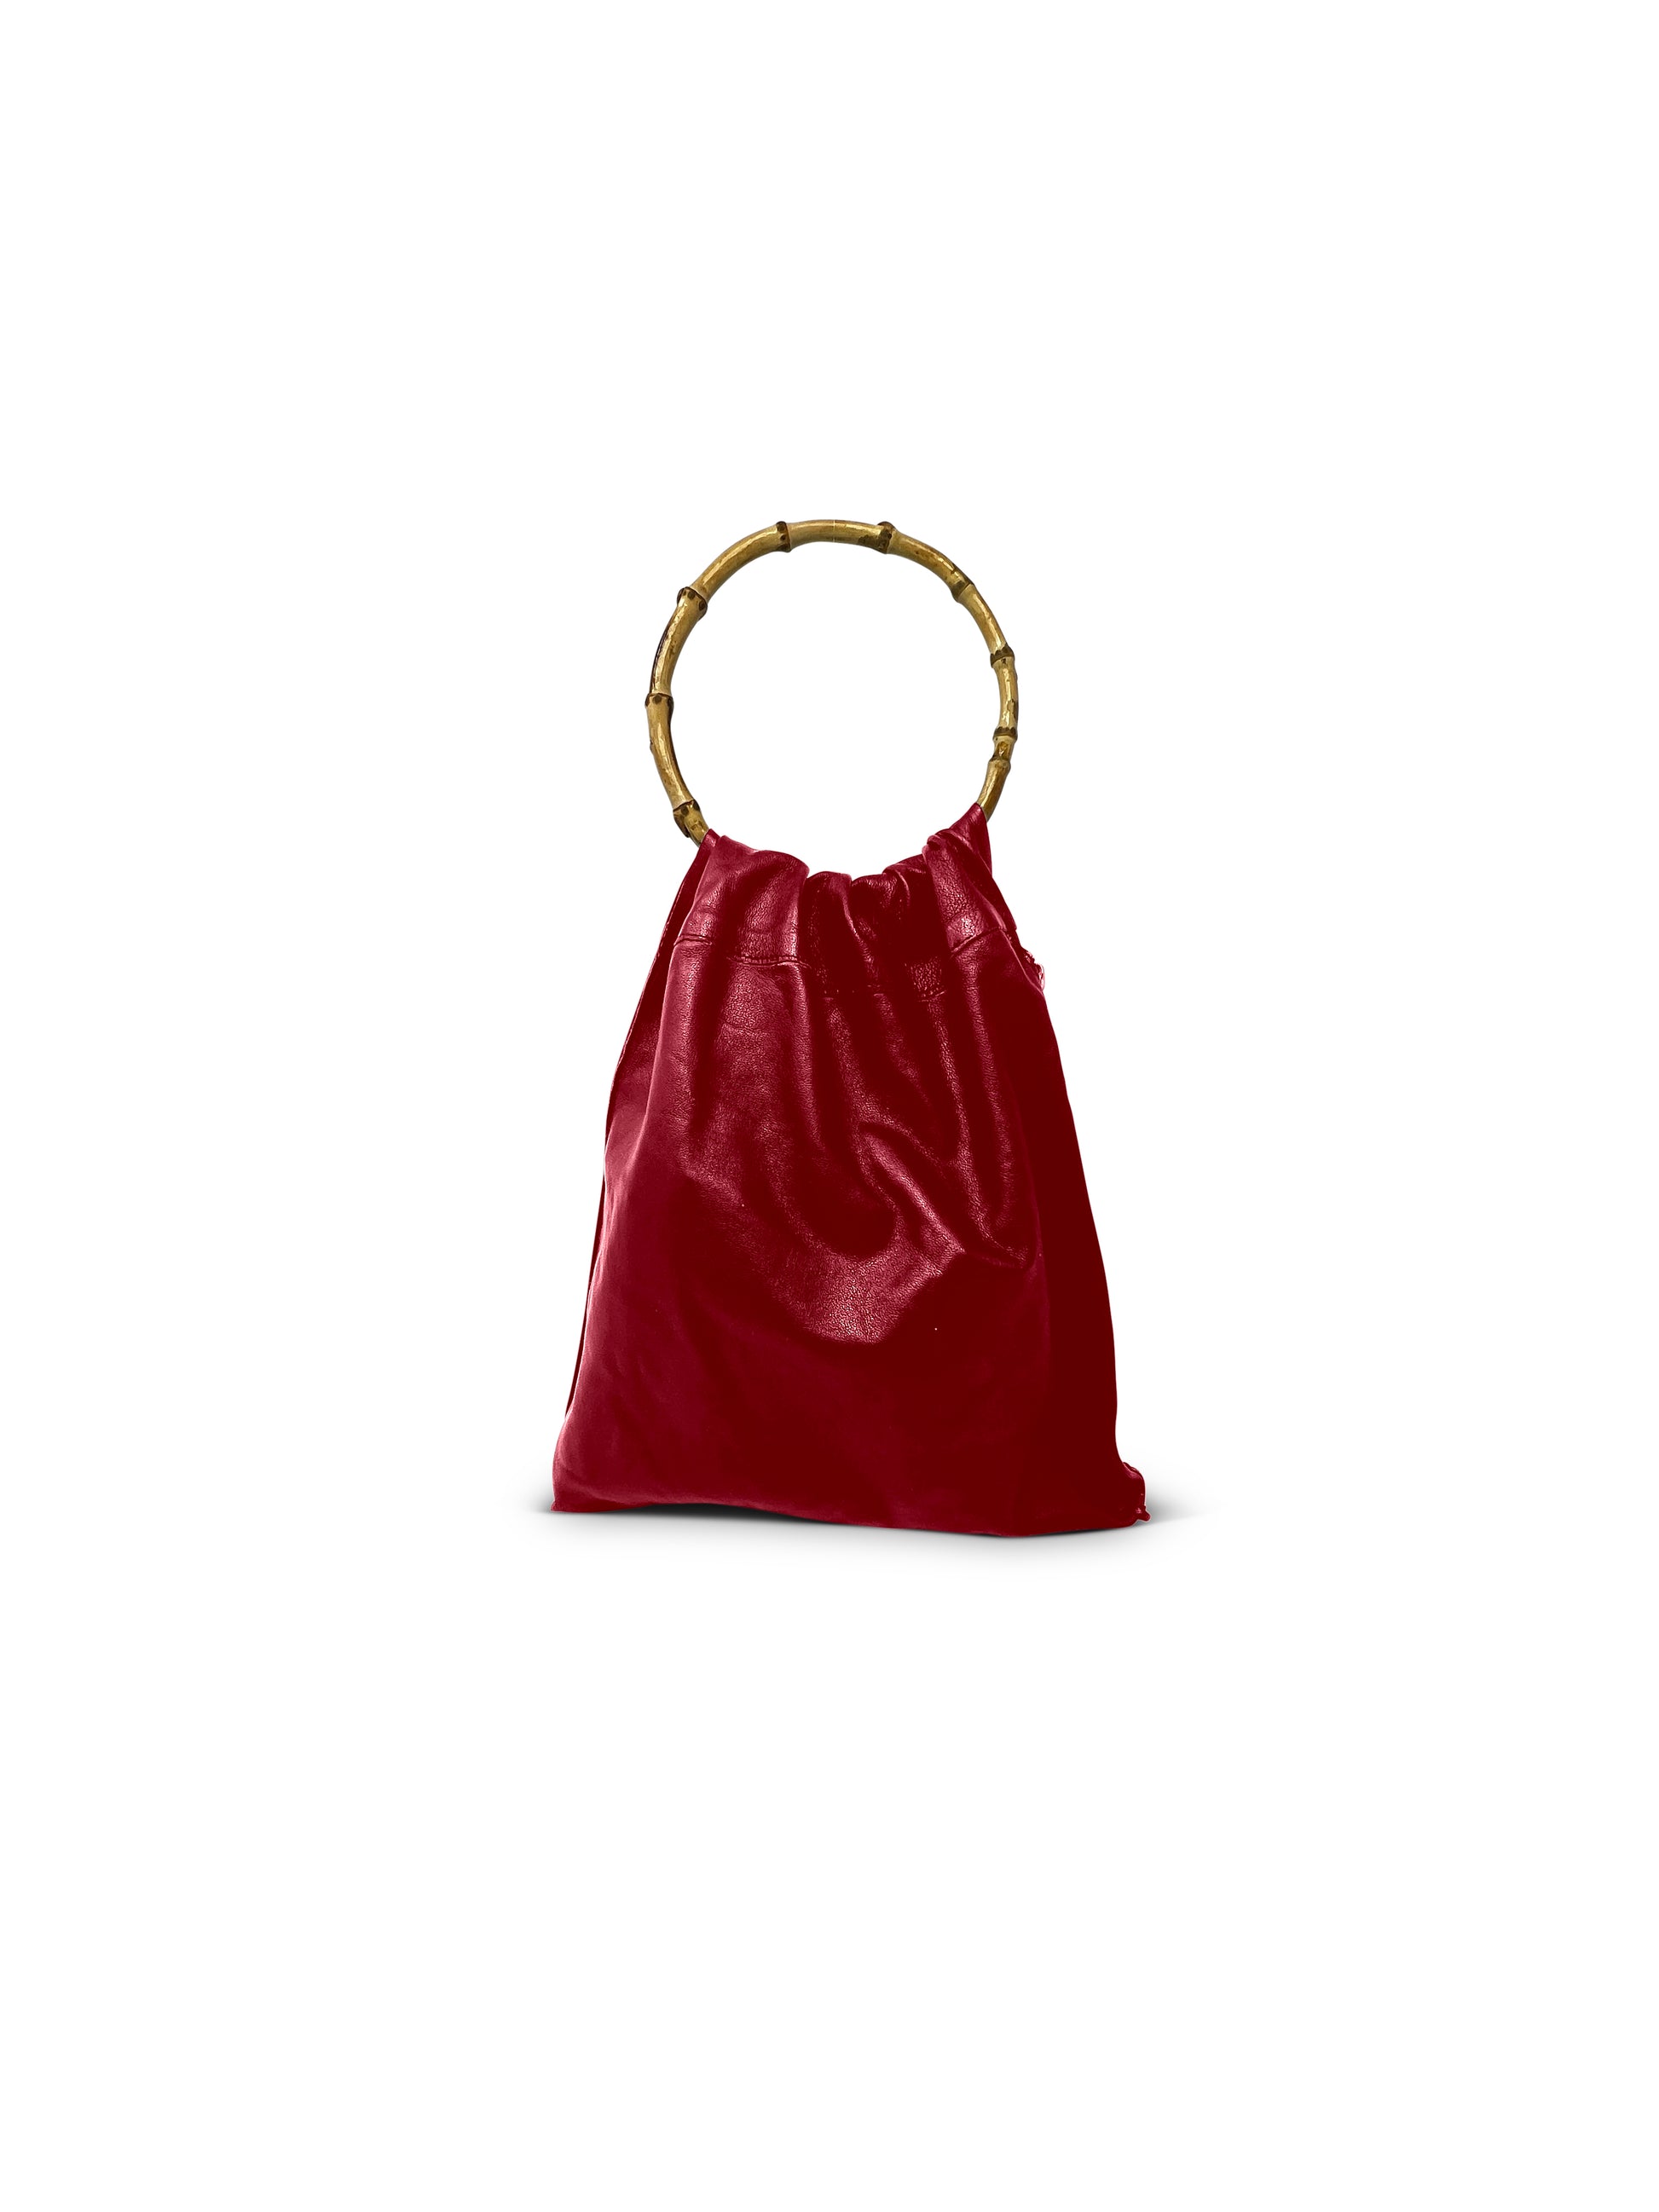 Red leather bag with a round natural bamboi handle & side zipper. Made in Los Angeles